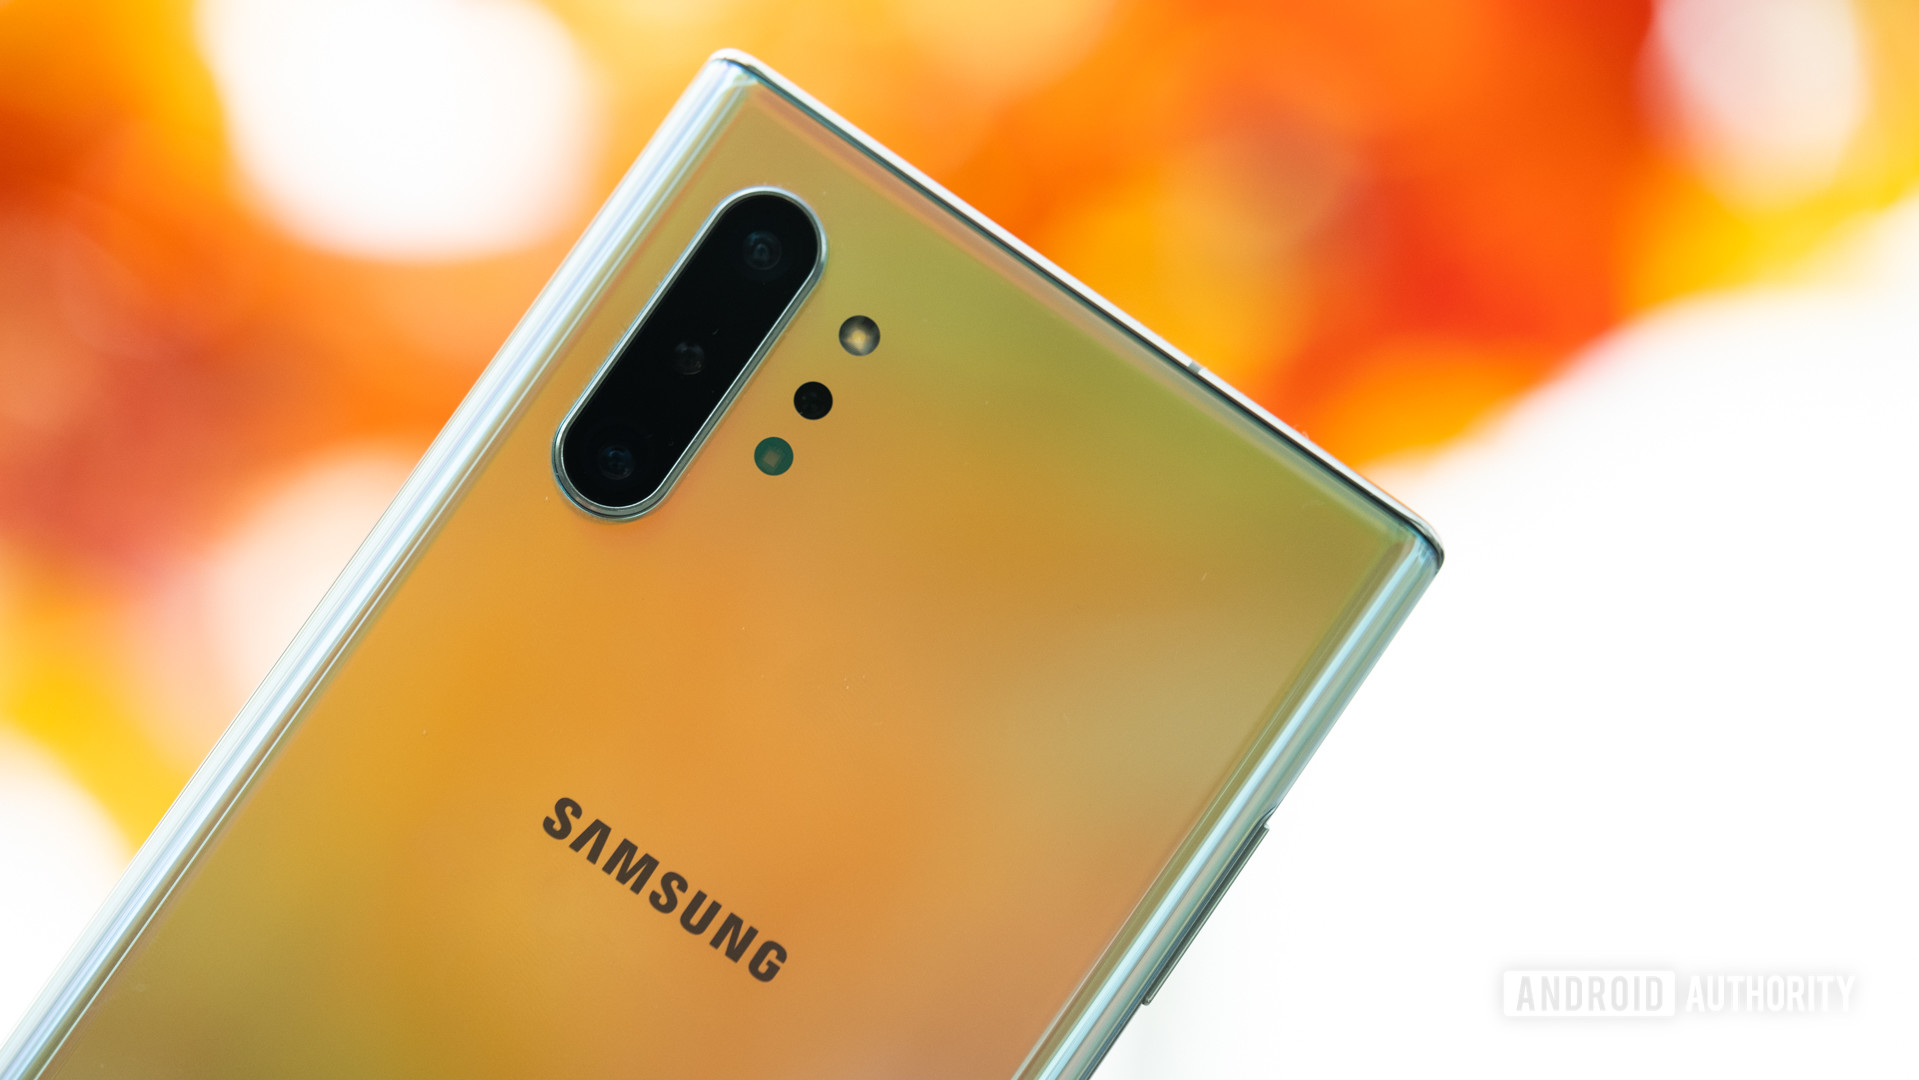 Samsung Galaxy Note 10 Plus back cameras and logo 1